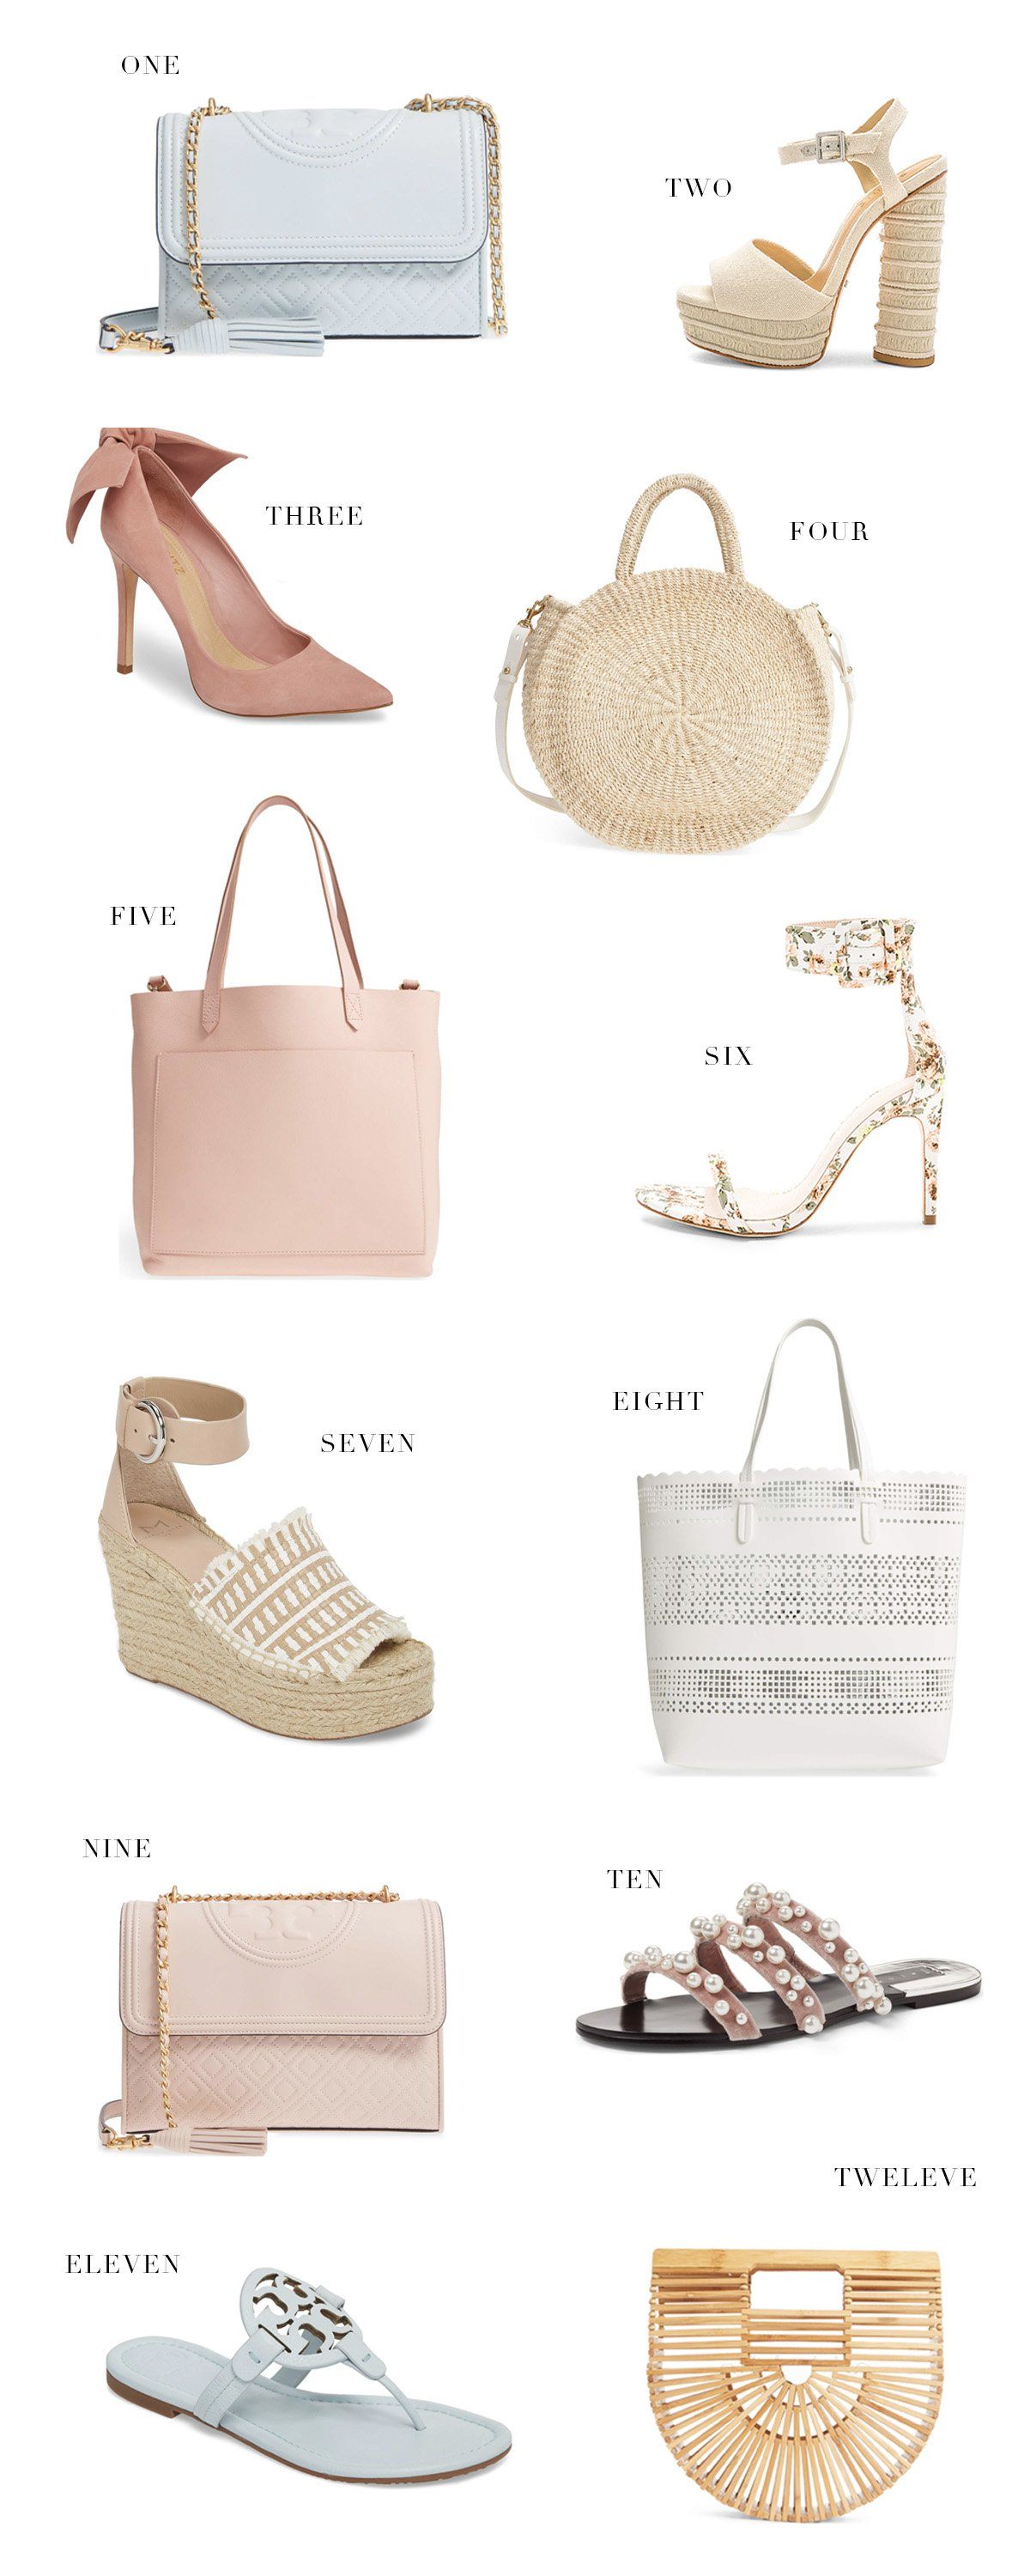 My Top Picks for Spring Bags and Shoes...